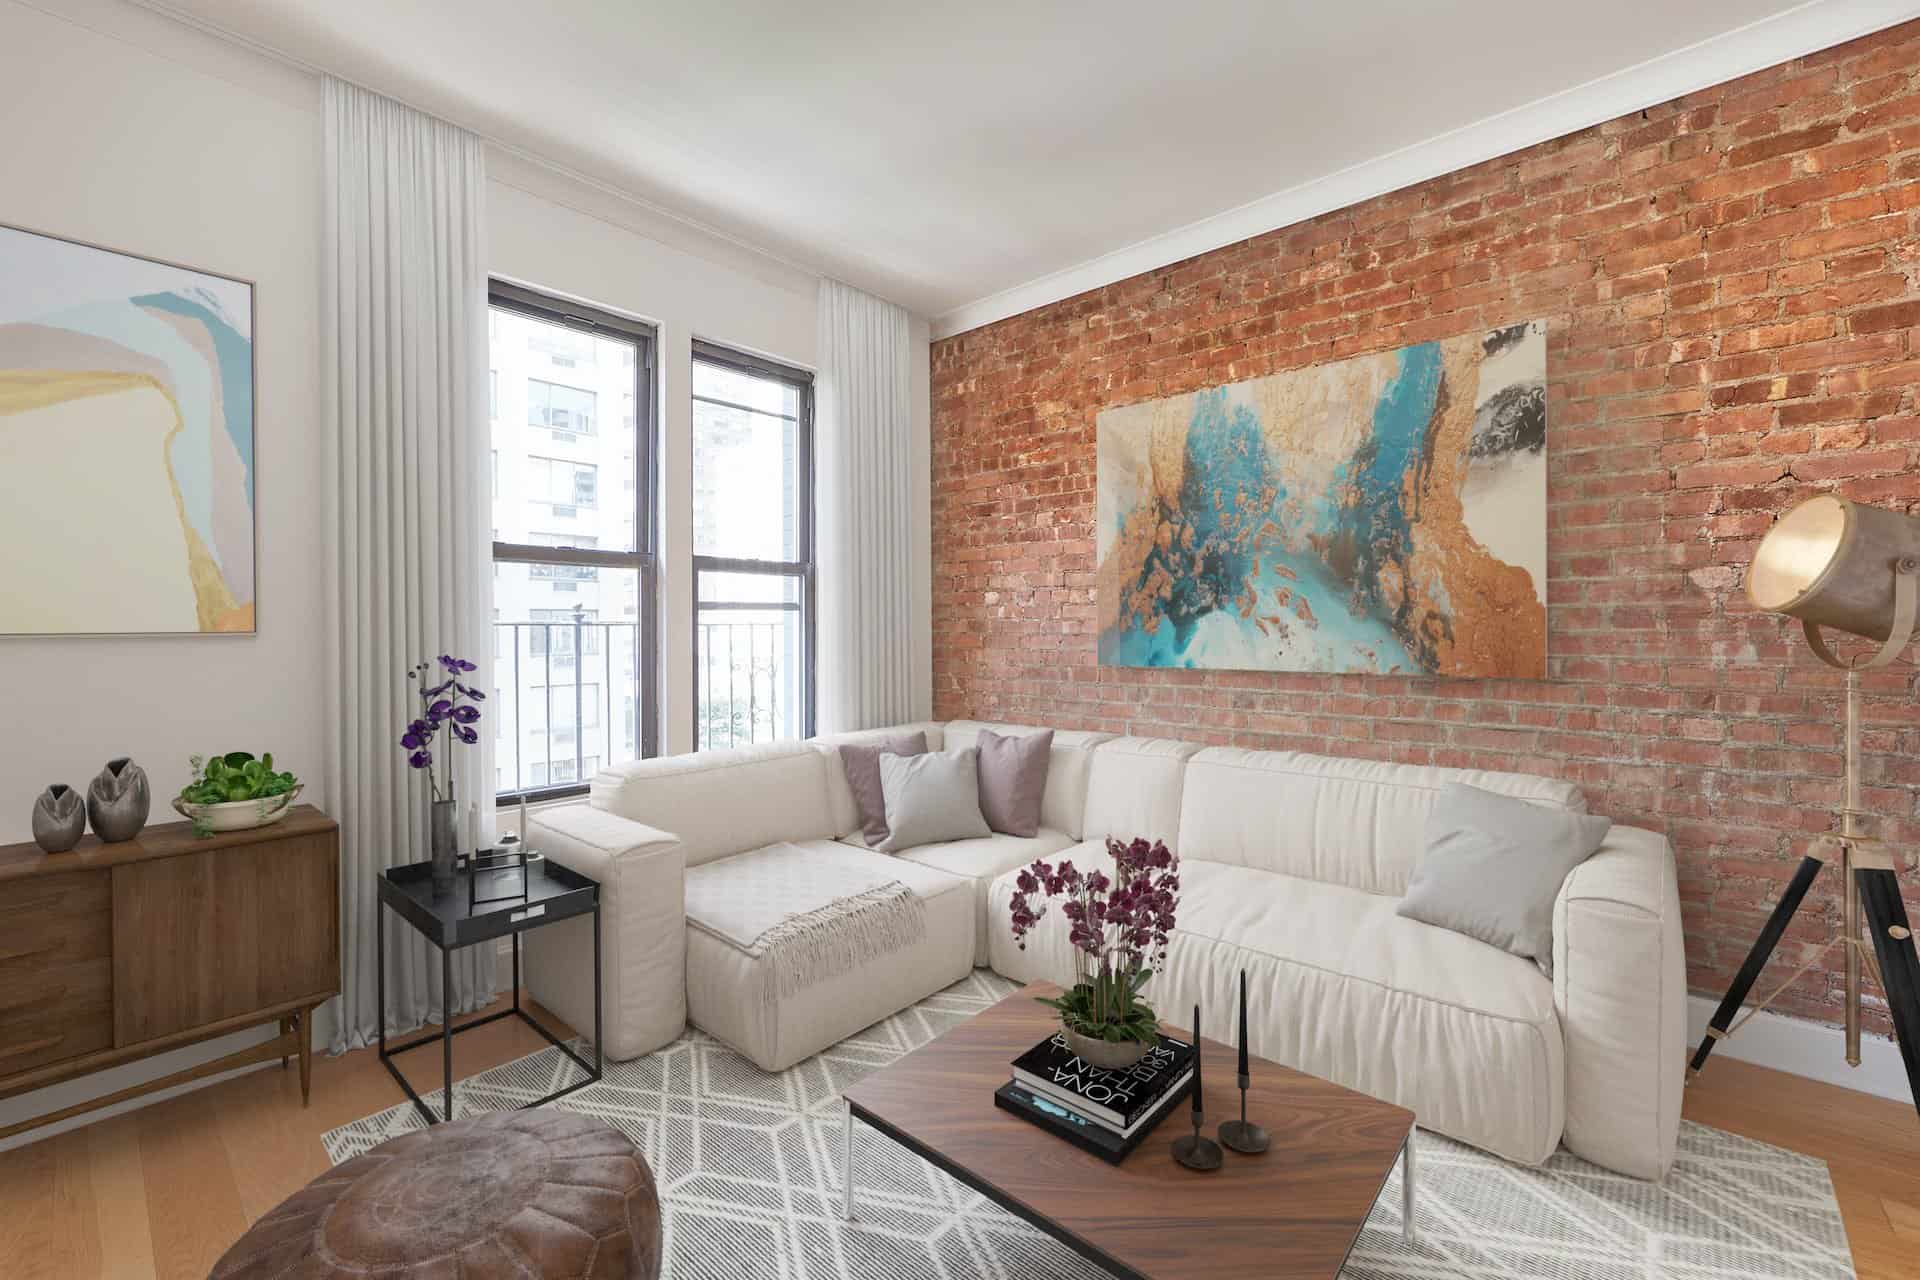 Living room at 207 East 33rd Street apartments. Open room with hardwood floors, a corner couch and a brick accent wall.